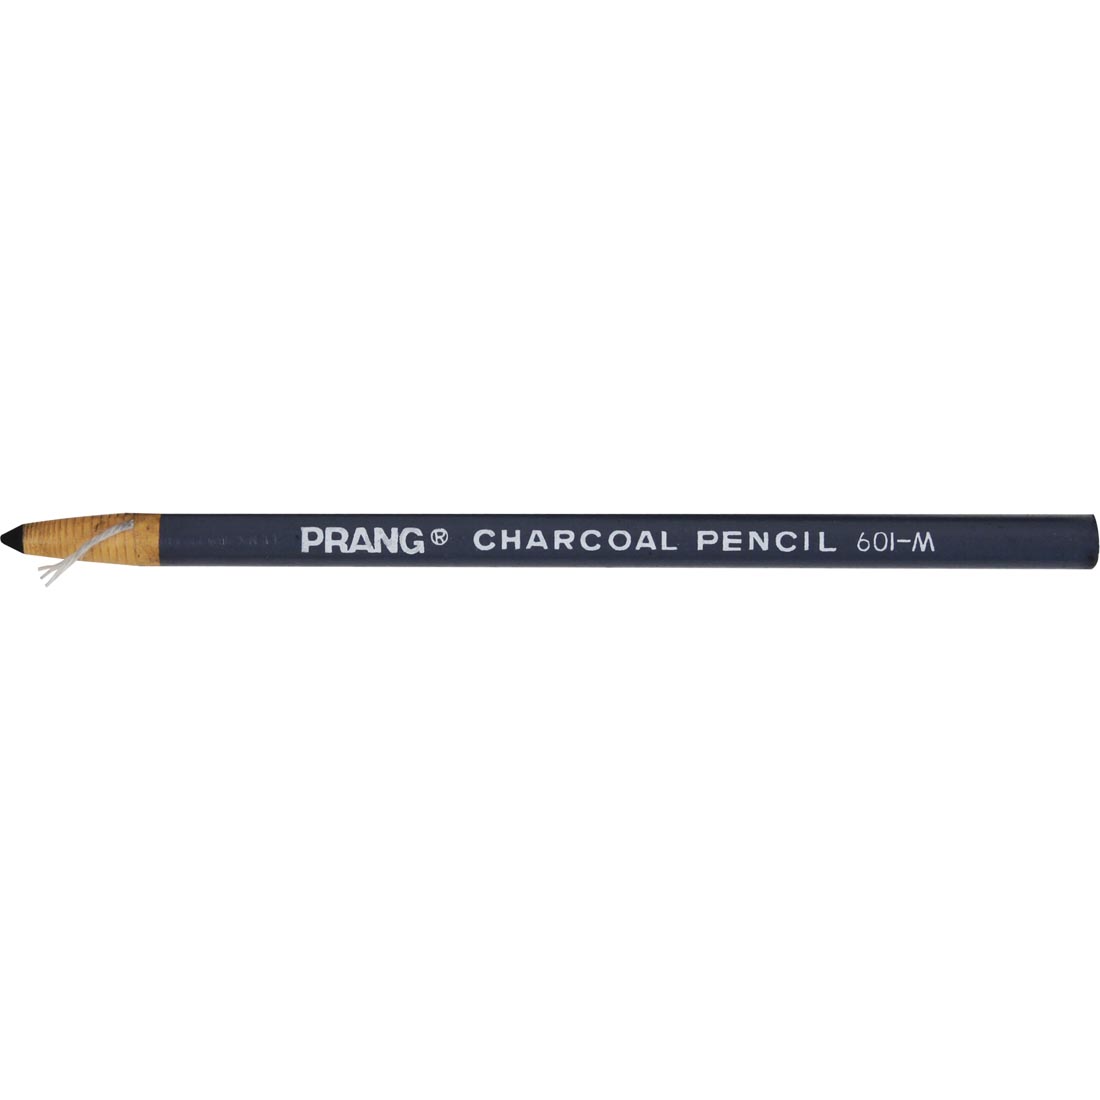 Prang Medium Charcoal Pencil with Pull-Down String